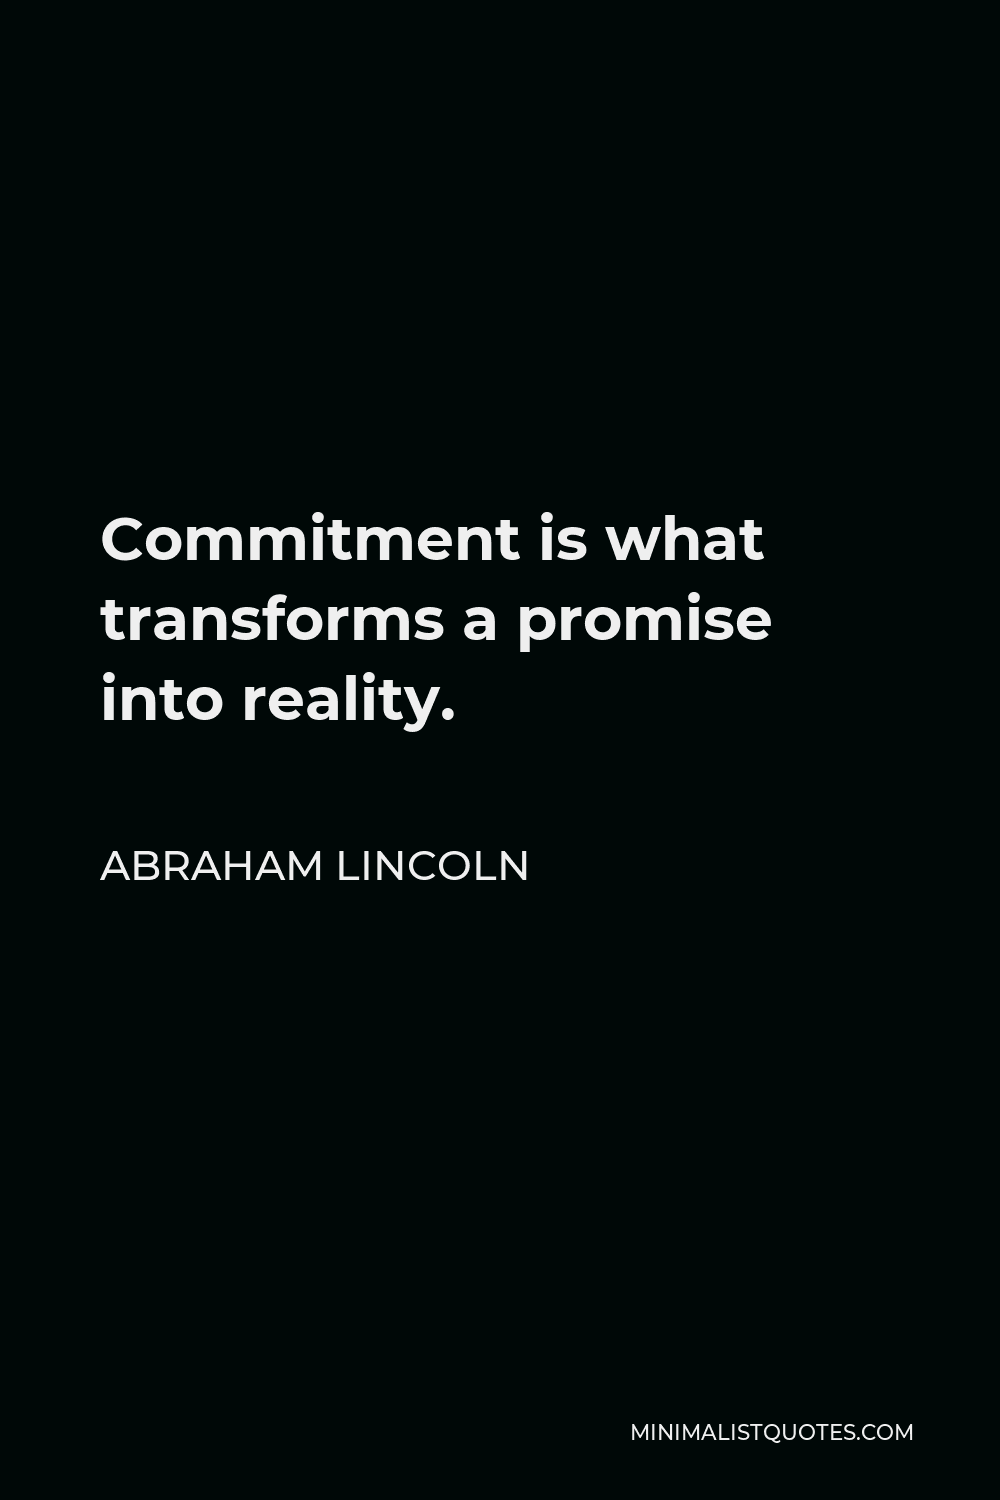 Abraham Lincoln Quote - Commitment is what transforms a promise into reality.